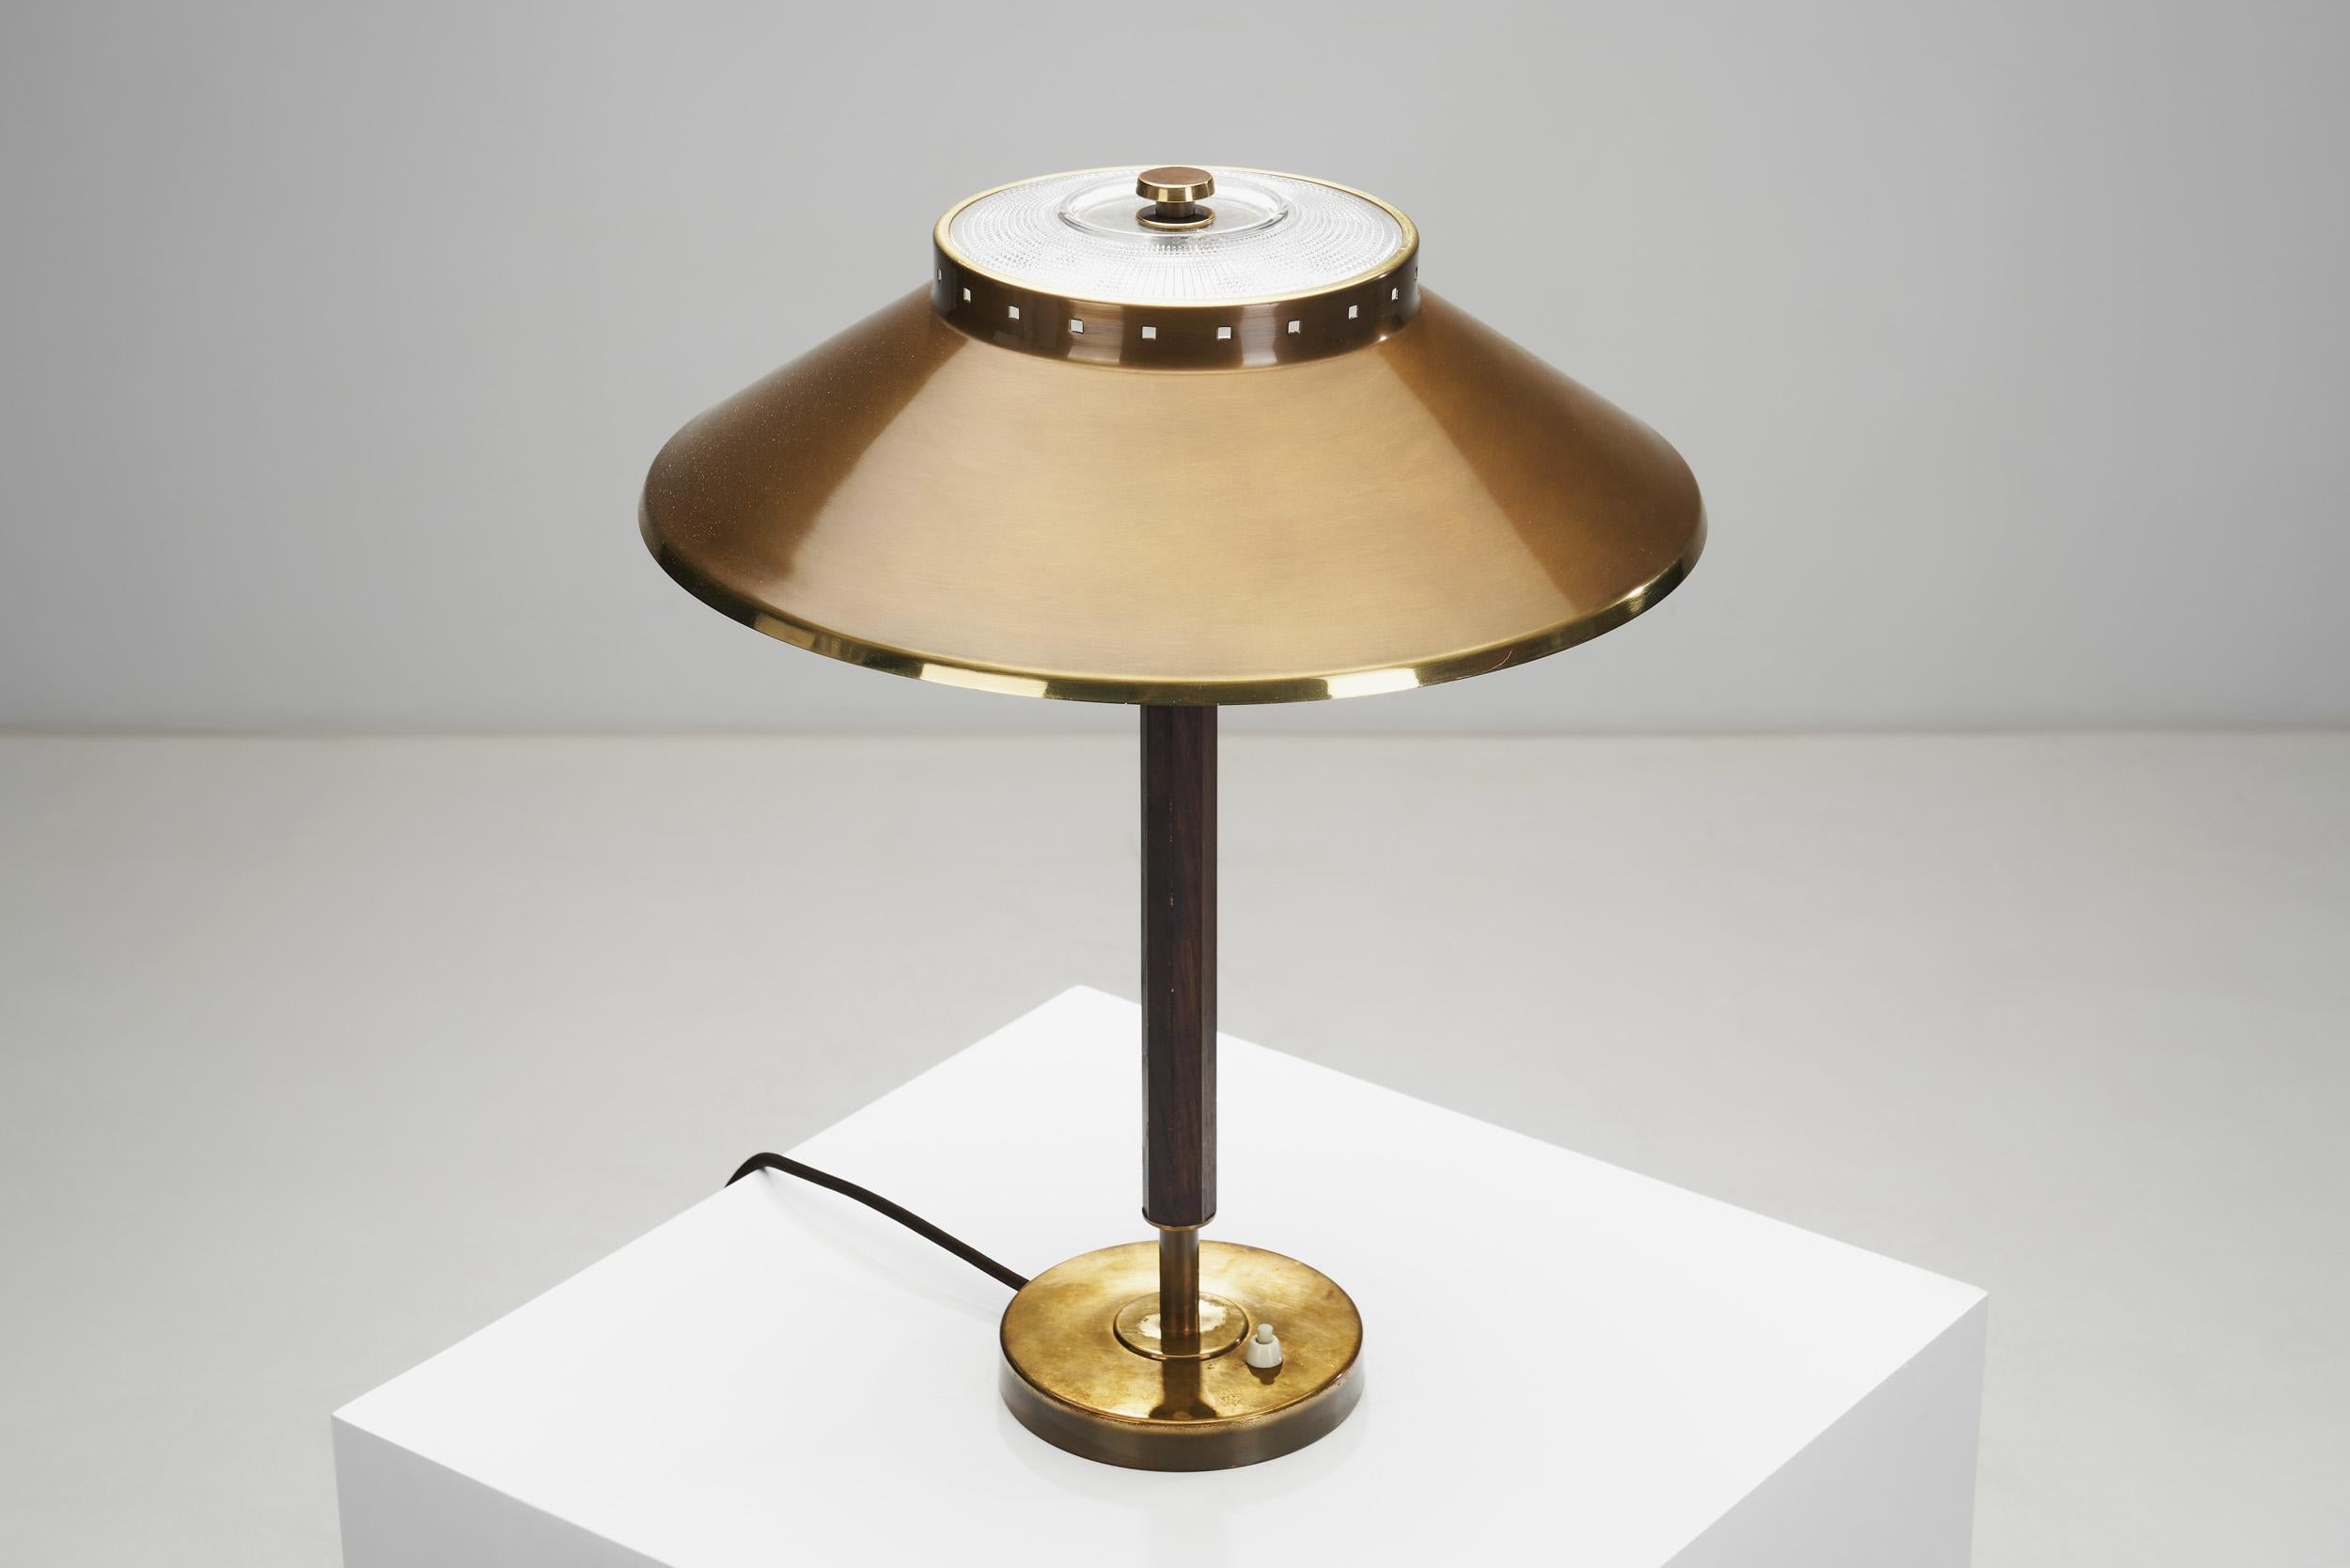 Brass, Oak and Glass Table Lamp by Boréns, Borås, Sweden 1940s For Sale 1